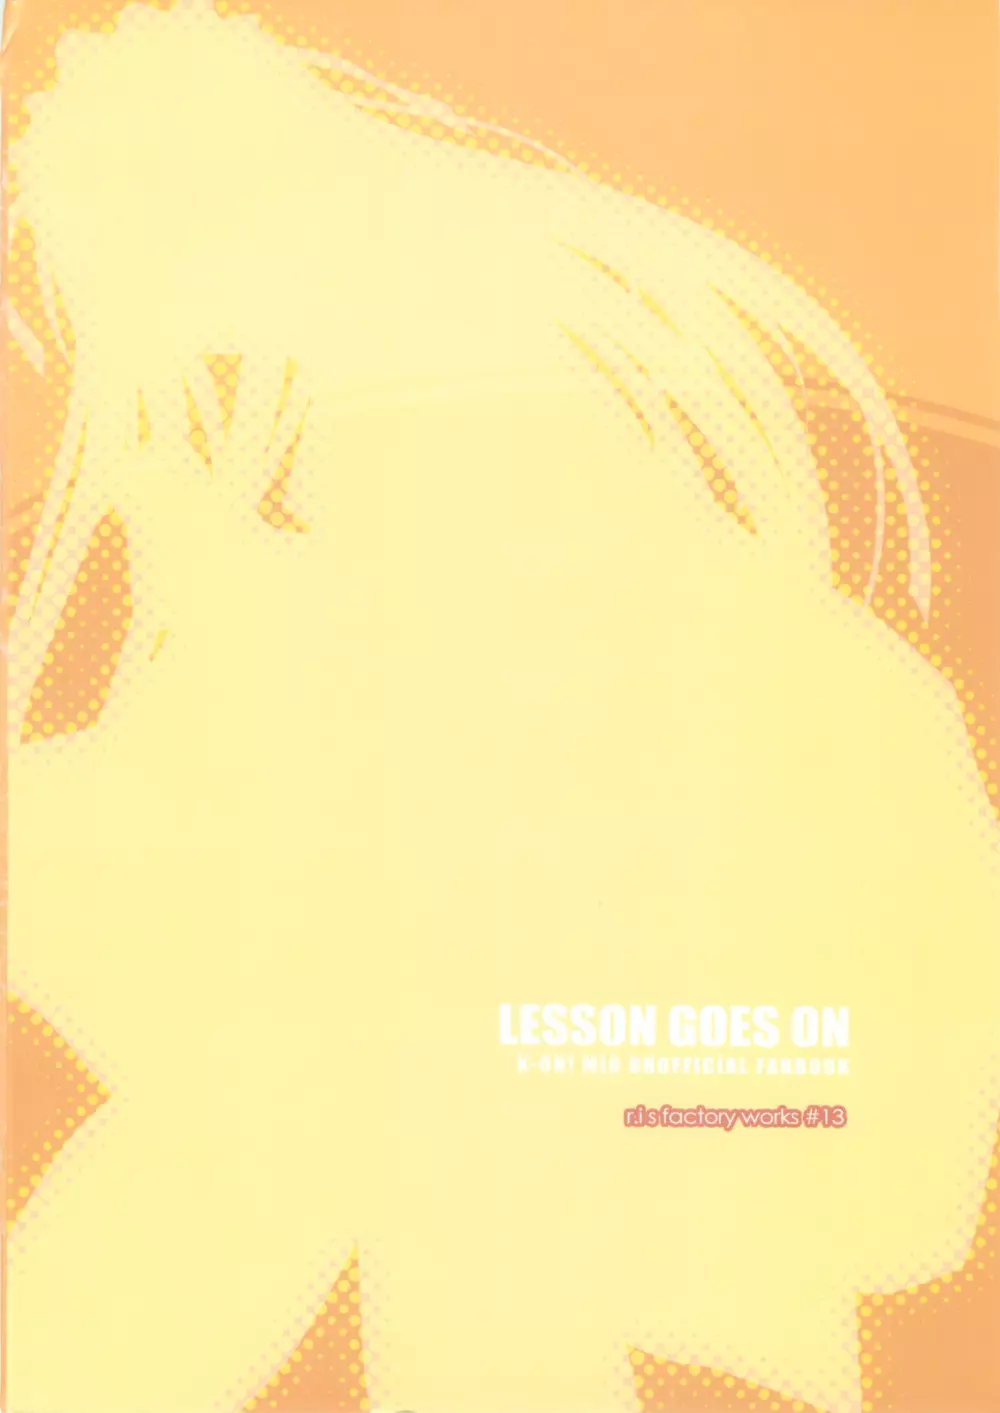 LESSON GOES ON 31ページ